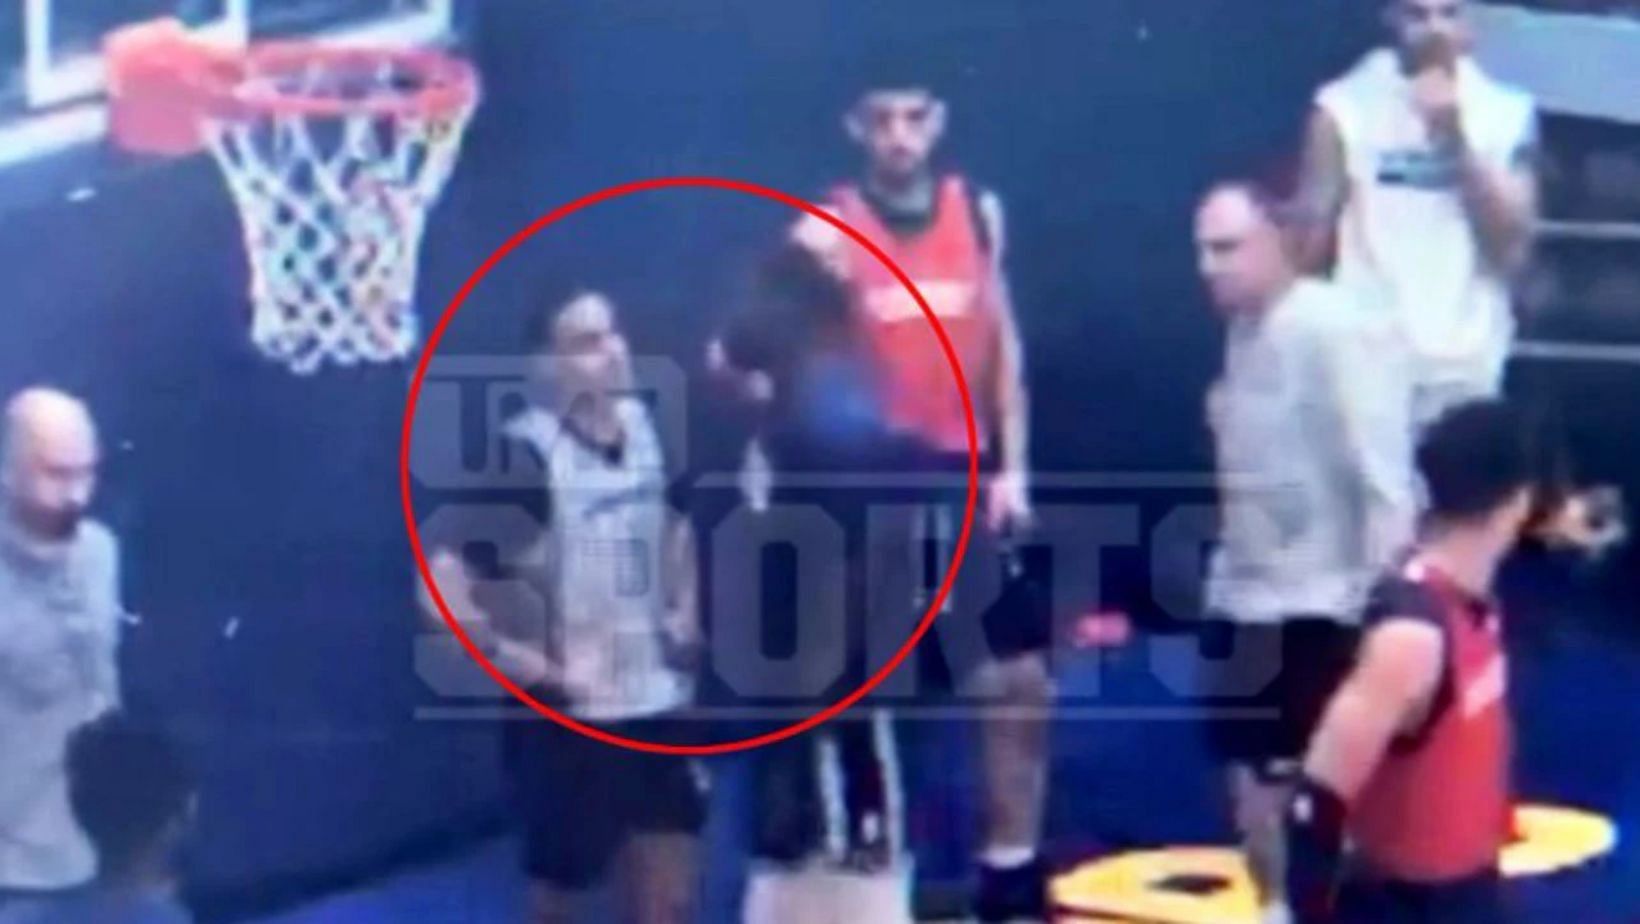 The Golden State Warriors&#039; season unraveled after Draymond Green punched Jordan Poole. [photo: TMZ]